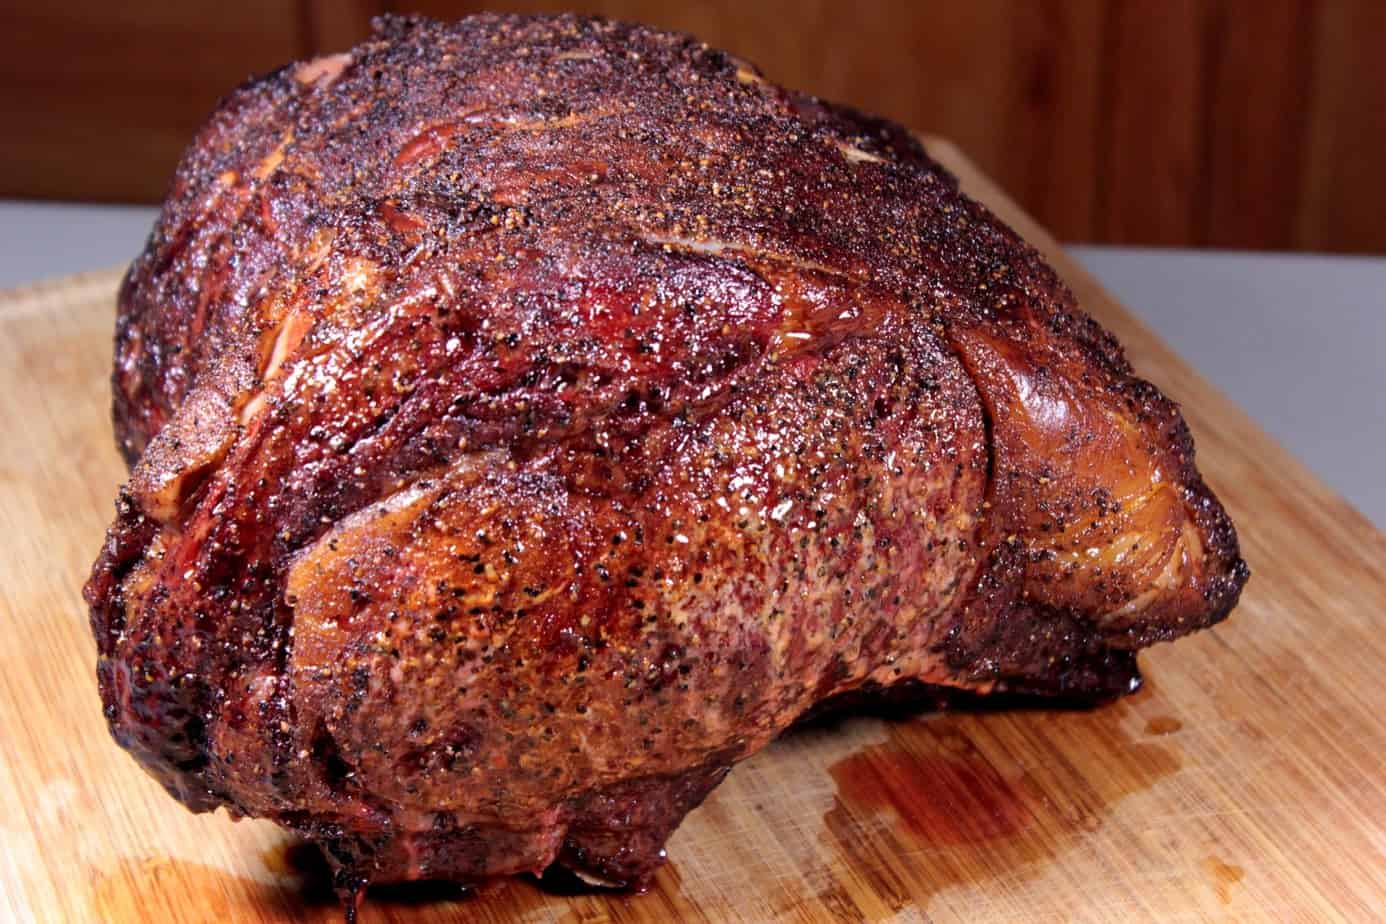 Smoked Prime Rib For Christmas Smoking Meat Newsletter,Rotel Dip With Queso Cheese